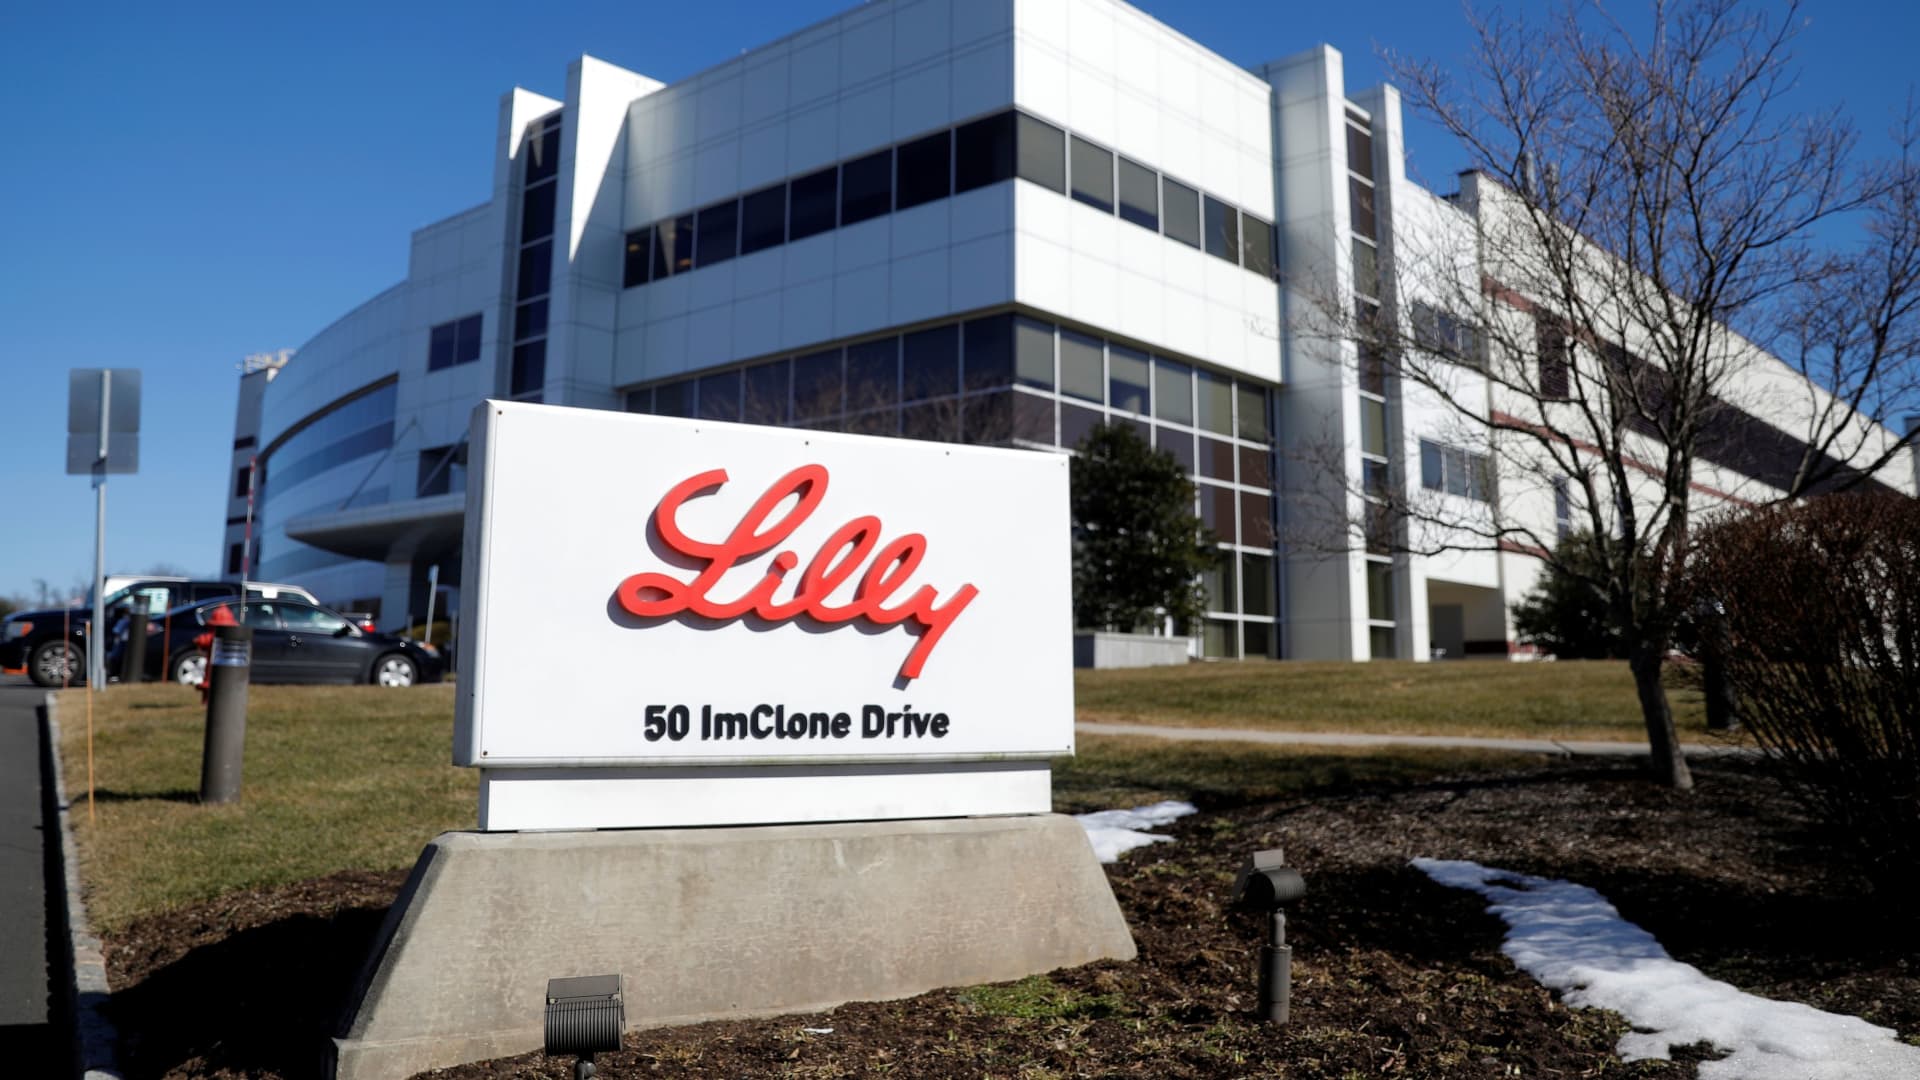 Uninsured pay high costs for insulin Eli Lilly vowed to lower